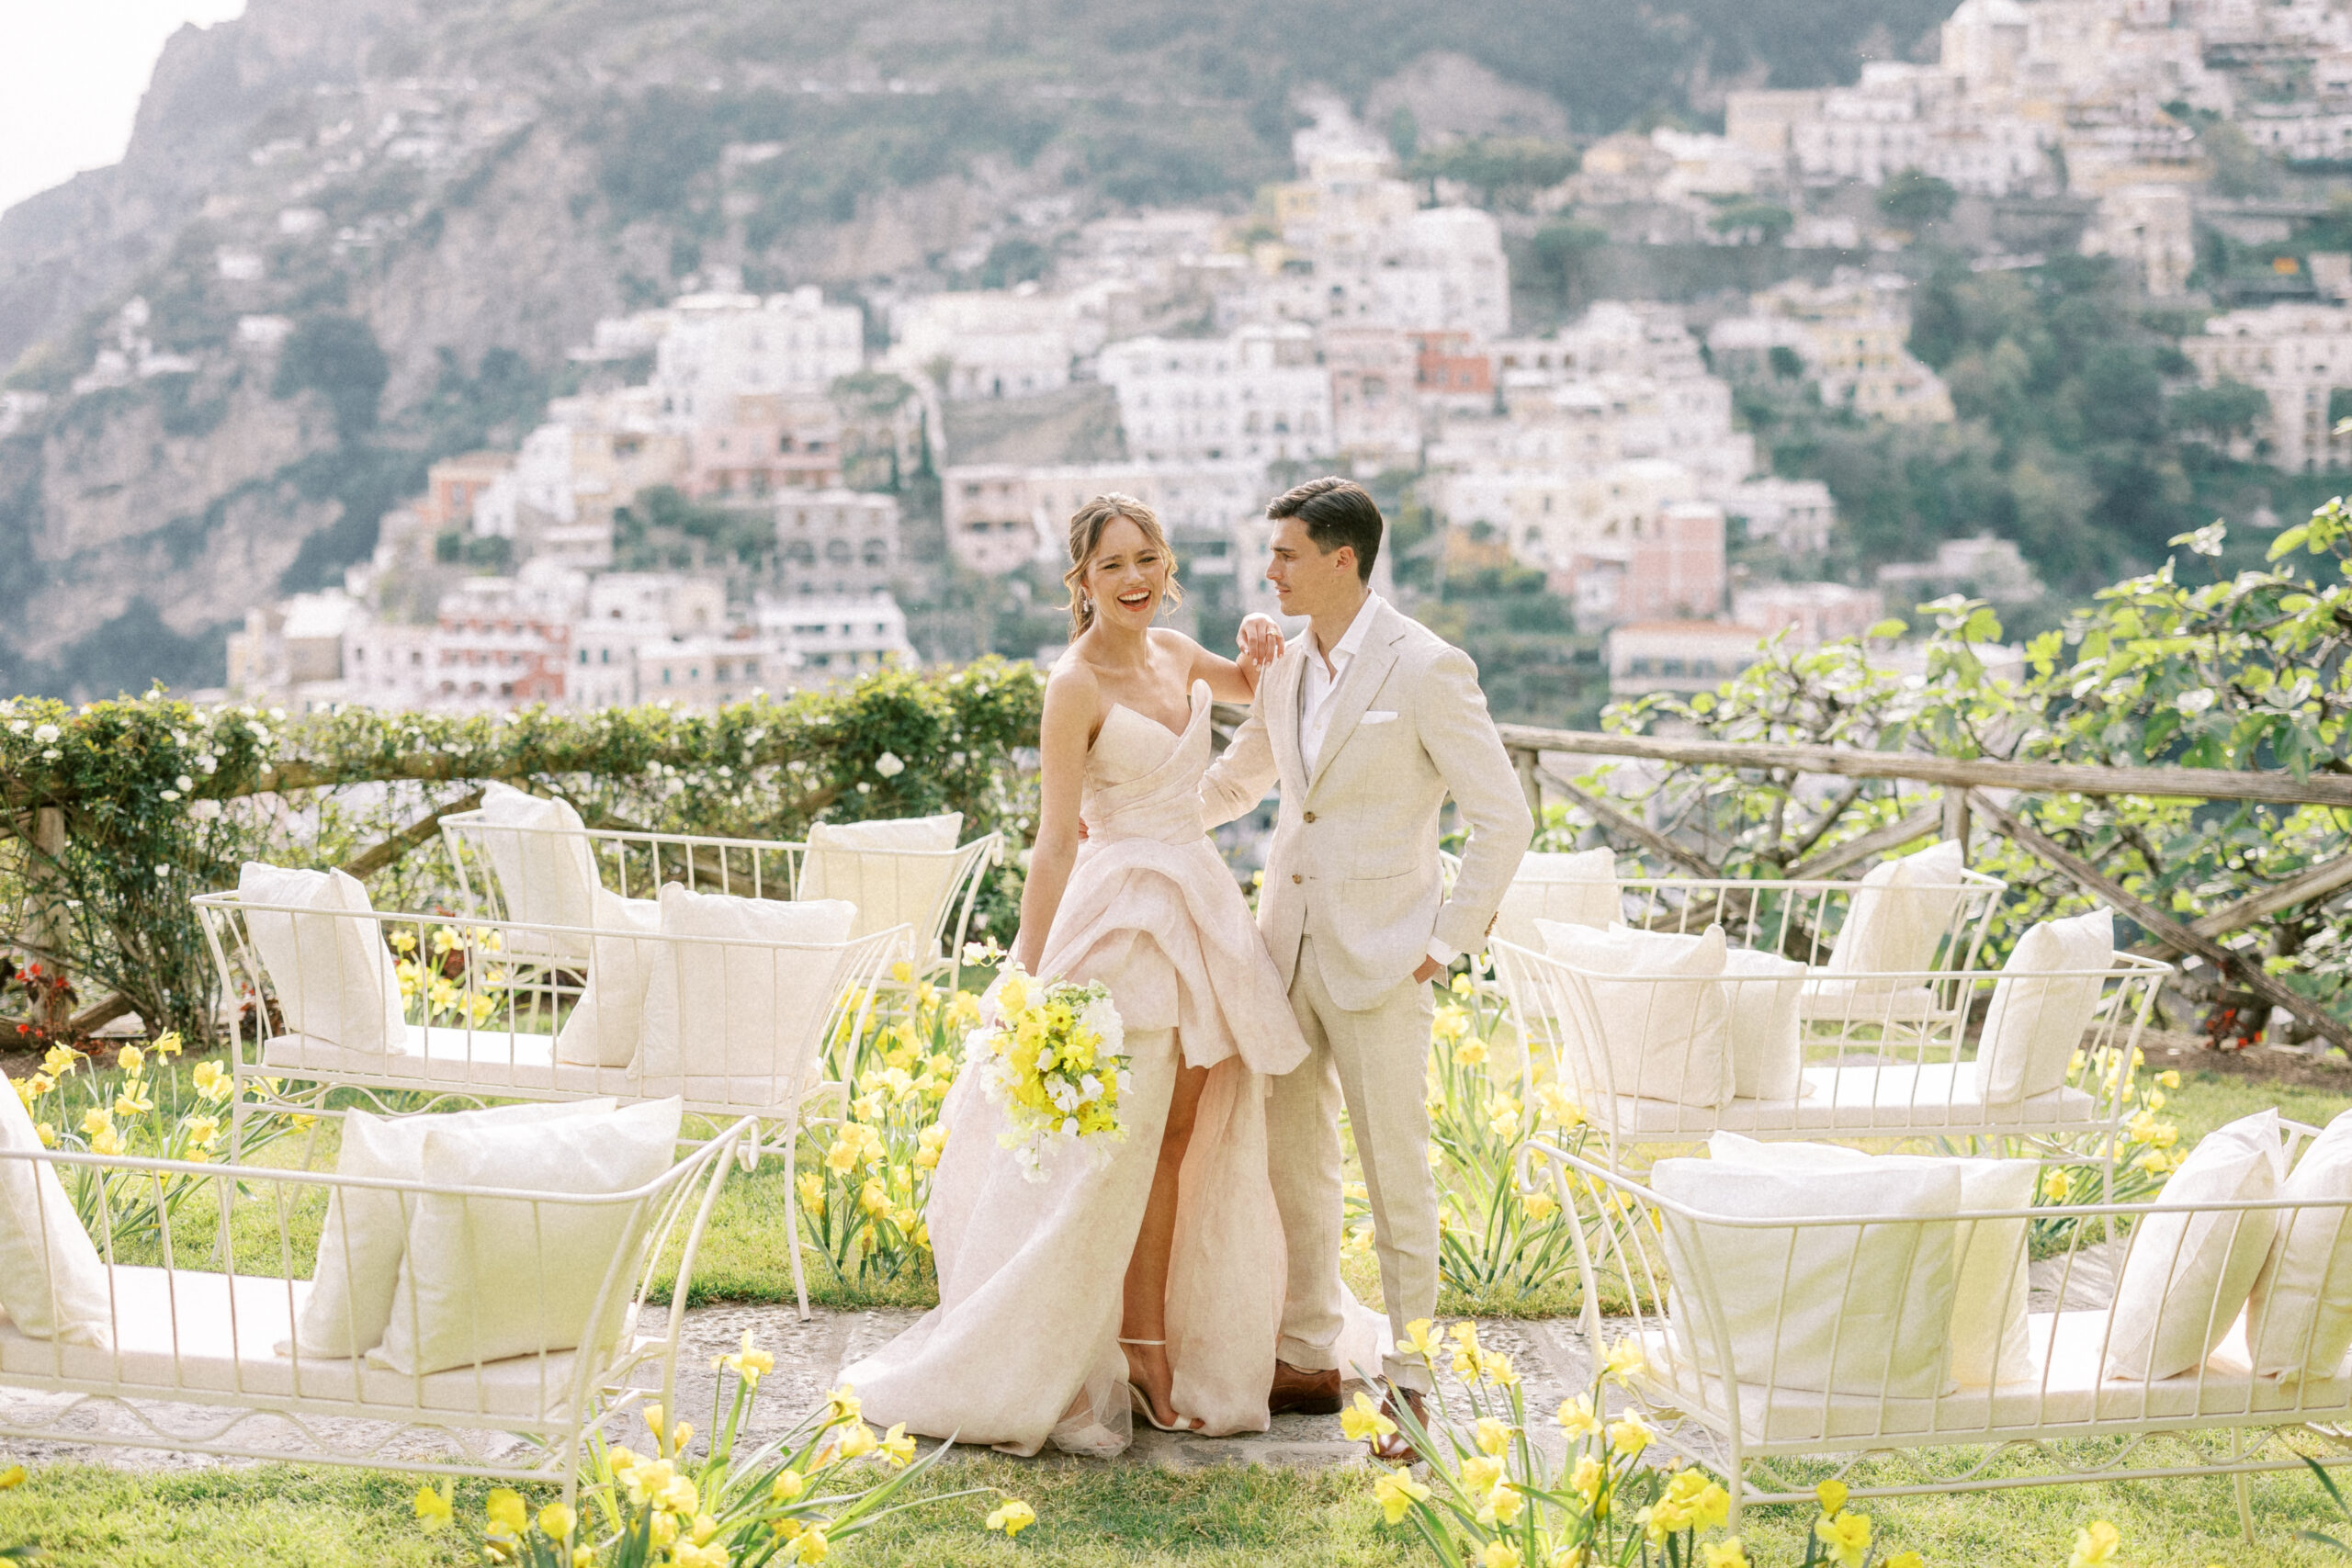 A groom looks at his bride while standing between their ceremony setup of white couches and a runway of daffodils. The background is slightly blurred but showcases villas on an Italian hillside.